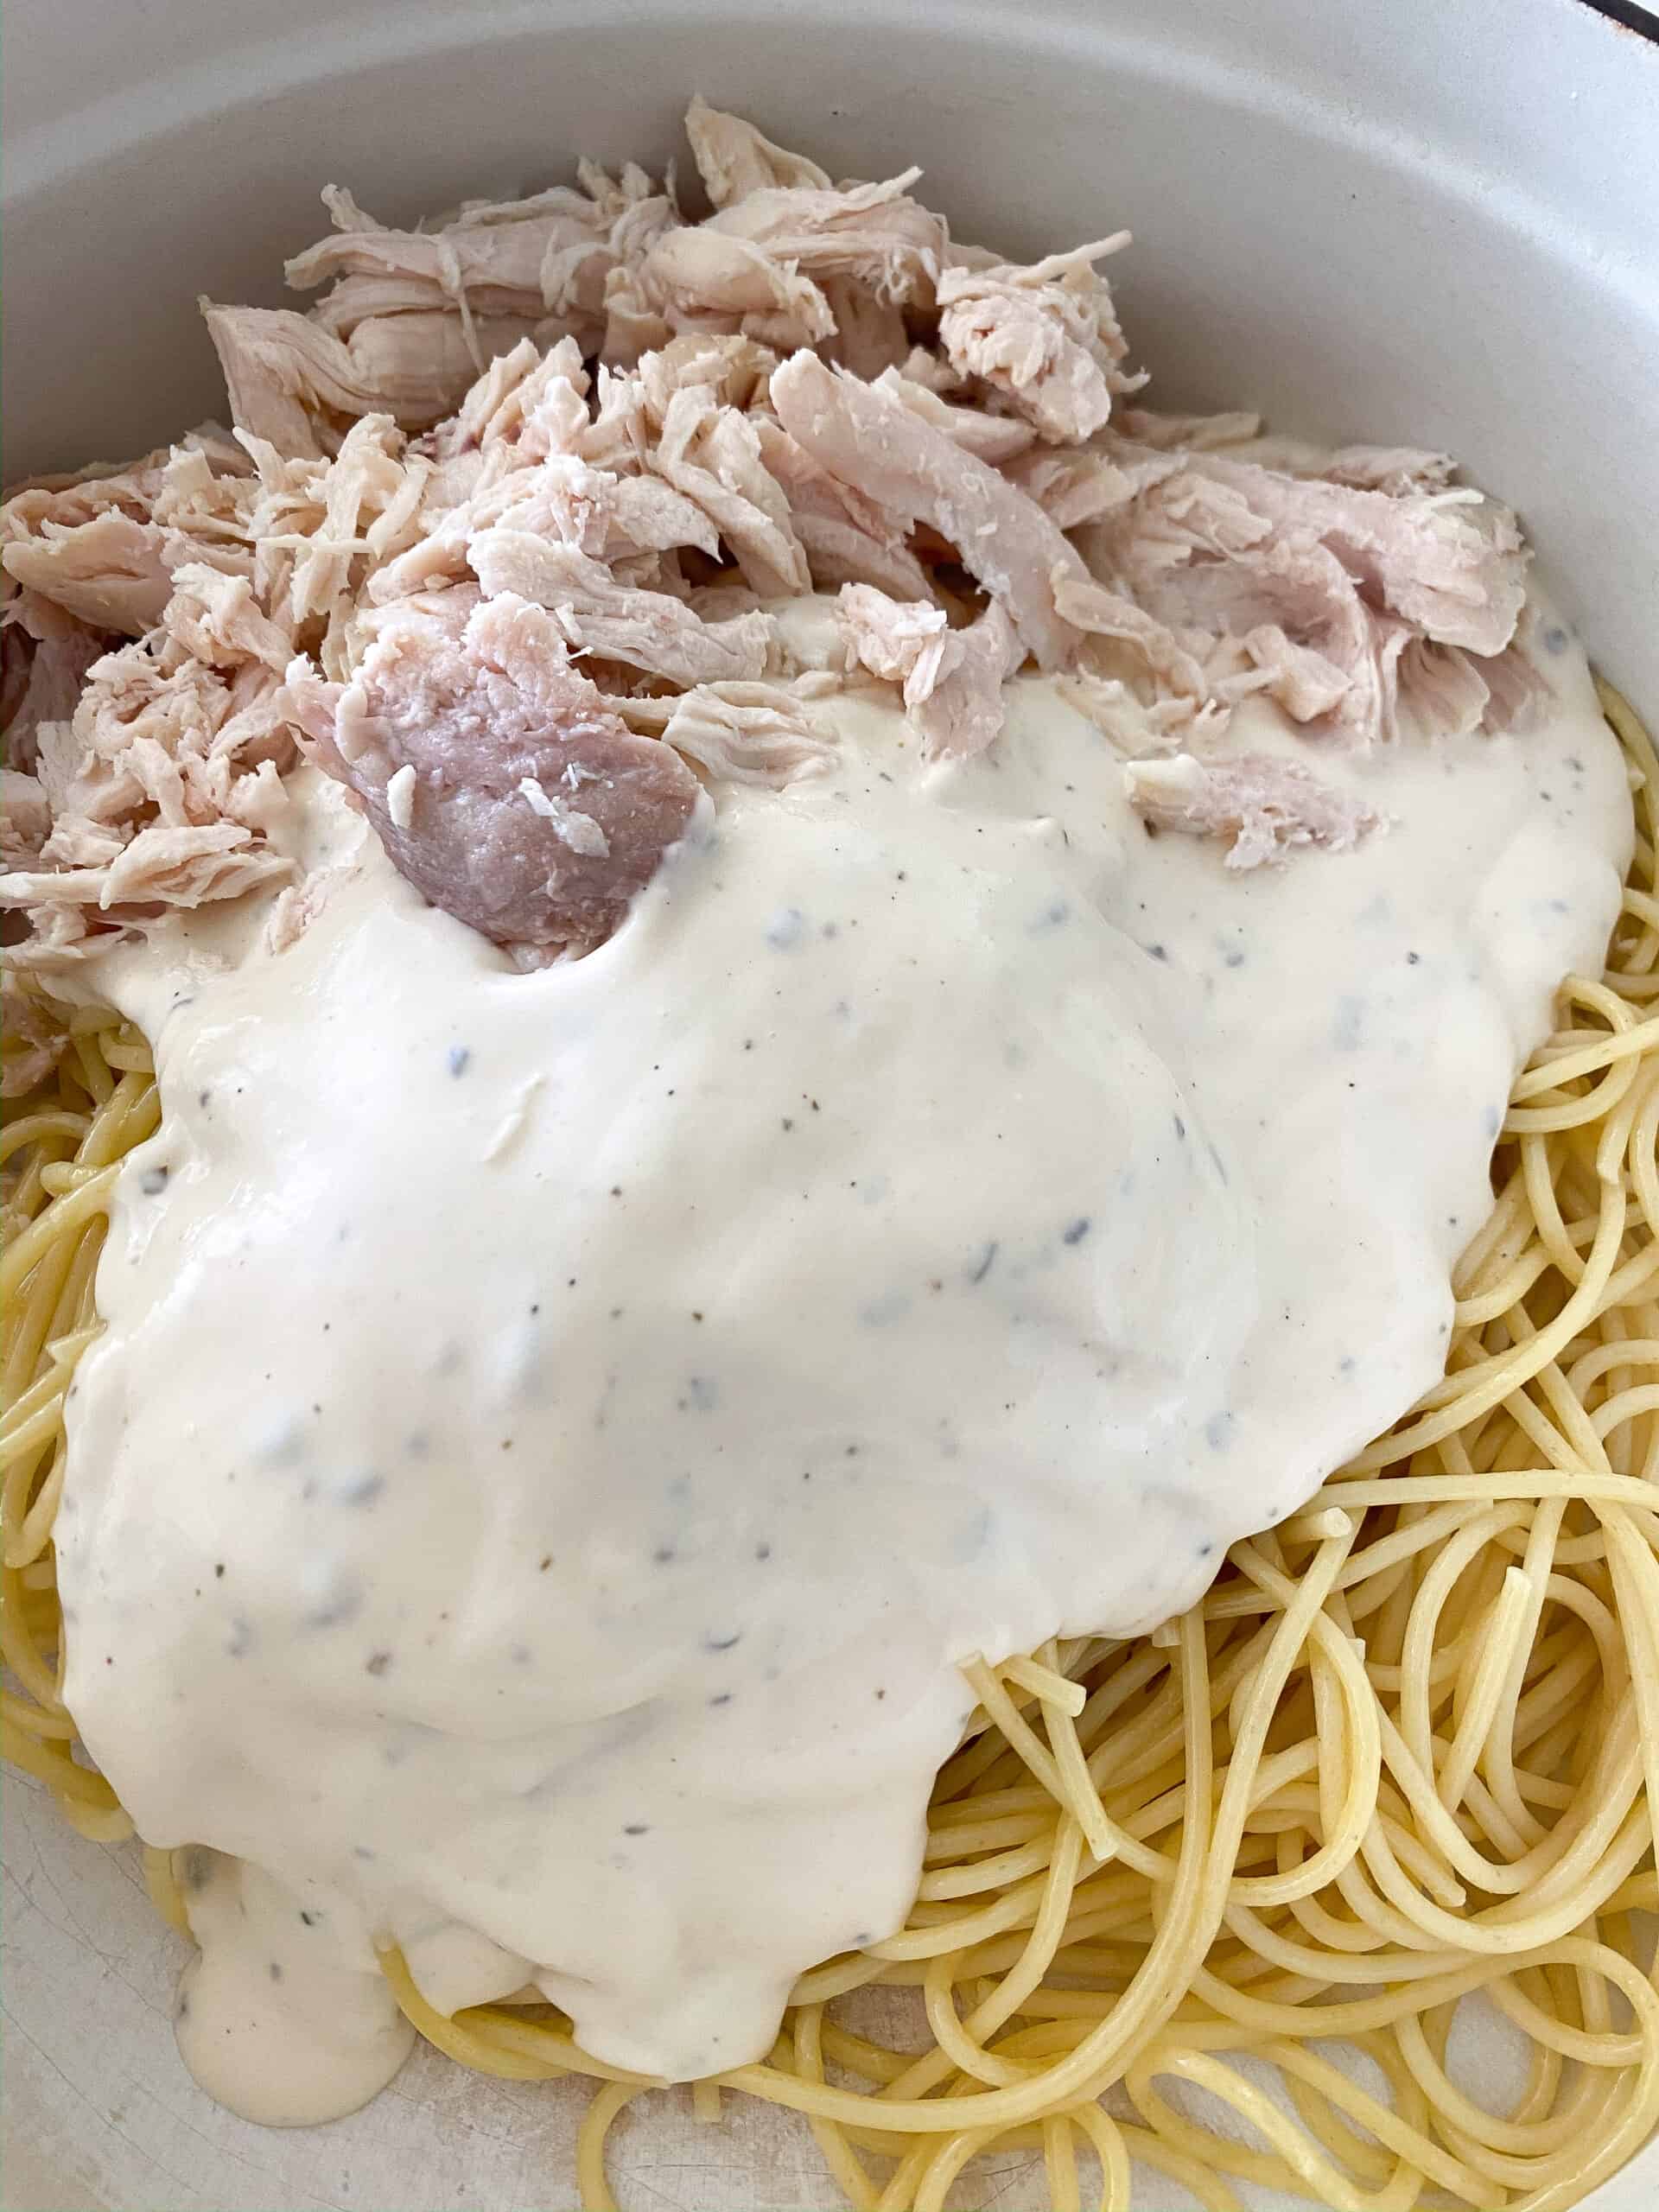 alfredo sauce over chicken and noodles in baking dish